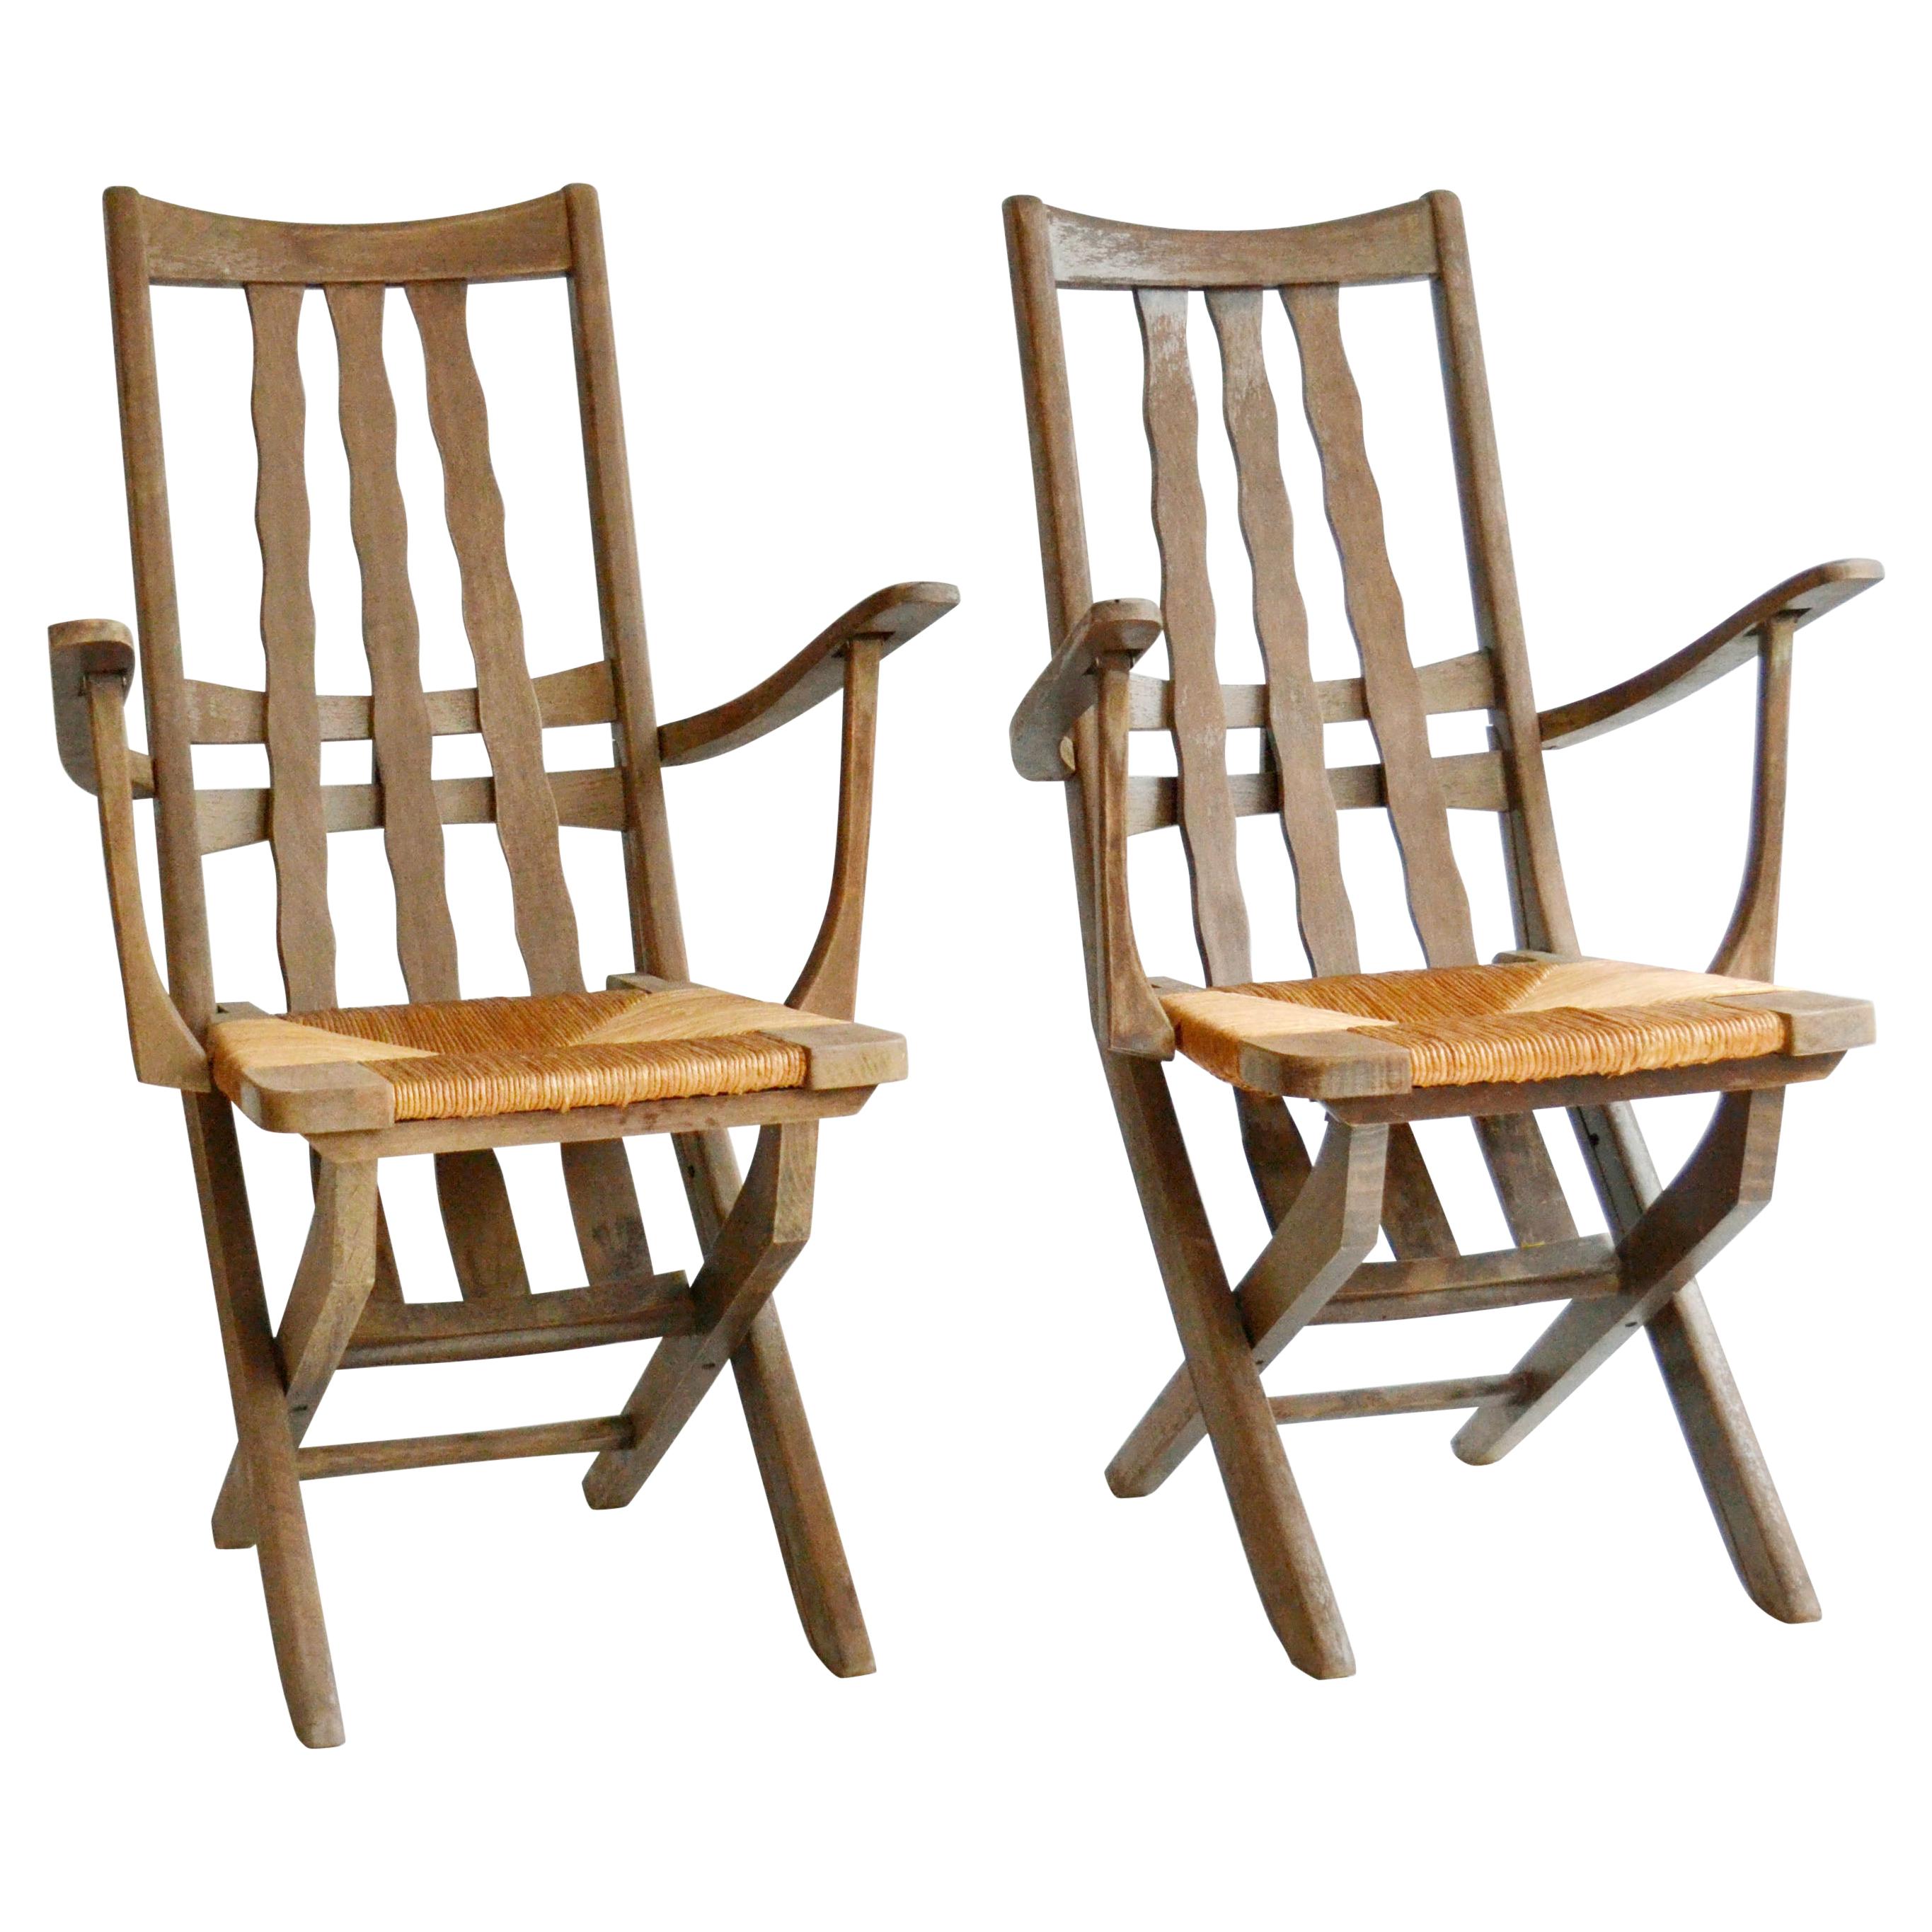 Pair of French Modernist Outdoor Oak Chairs, French, 1950s